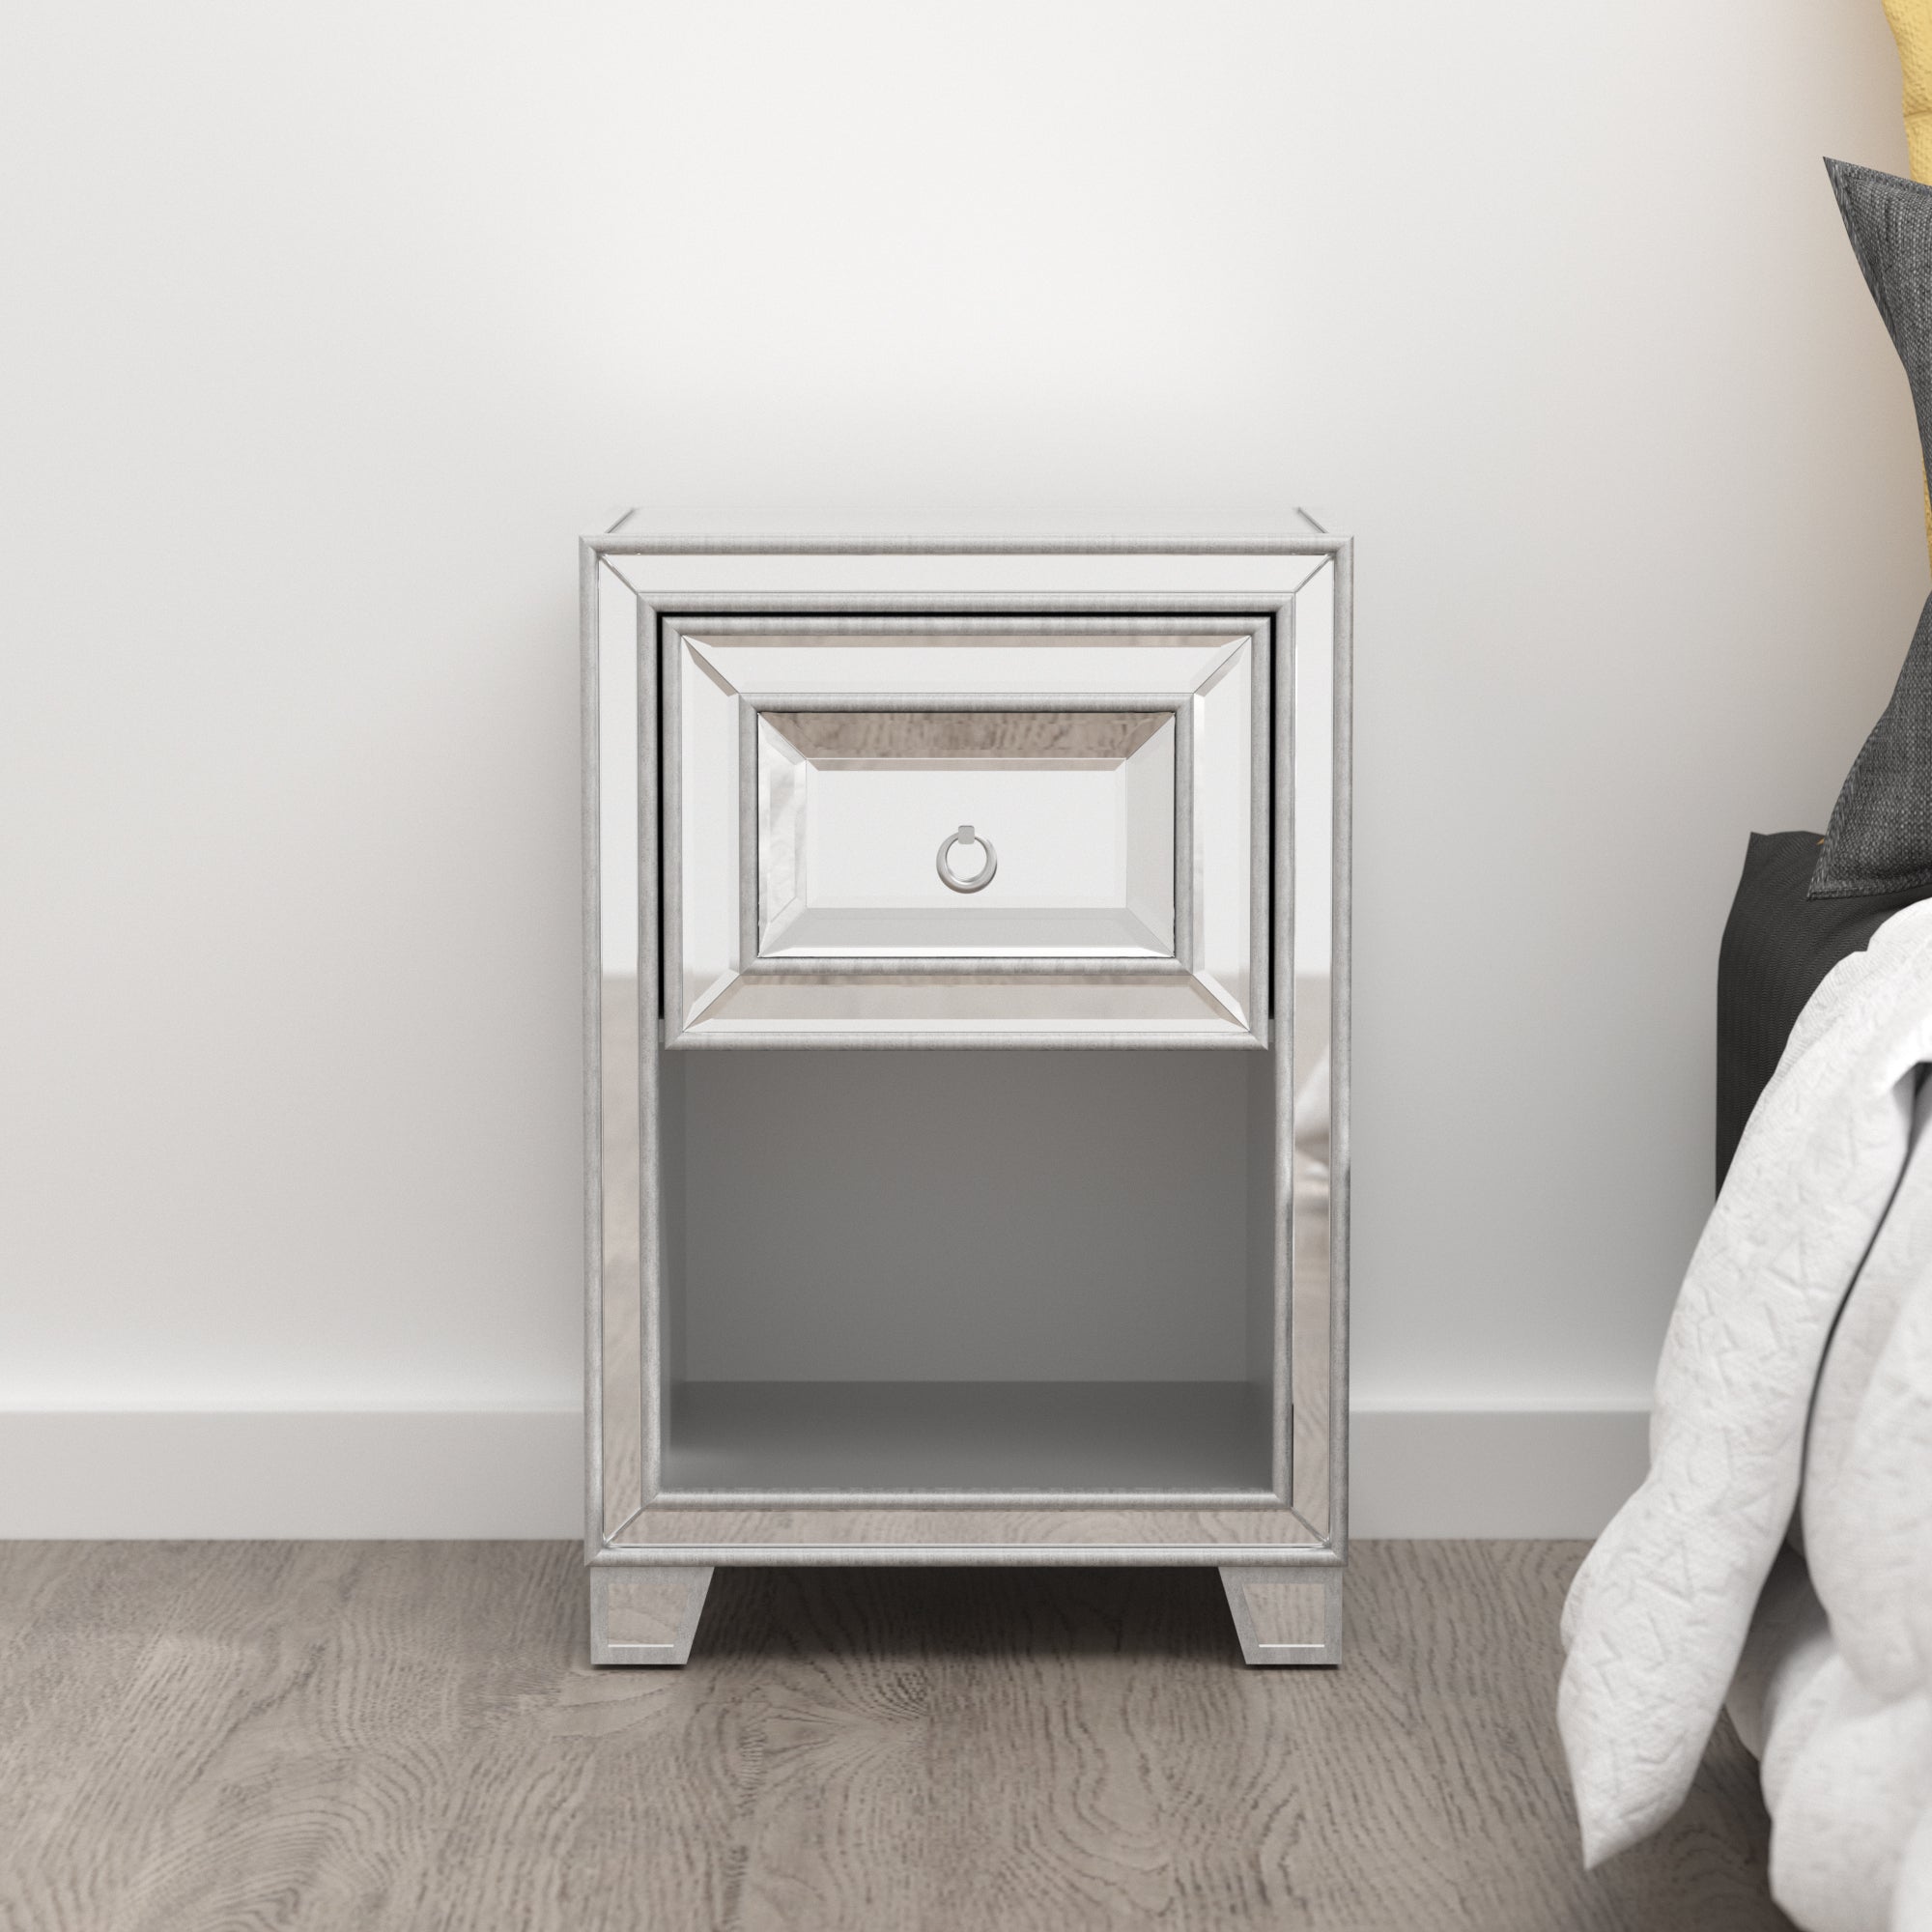 1-Drawer Wood Nightstand with Open Storage